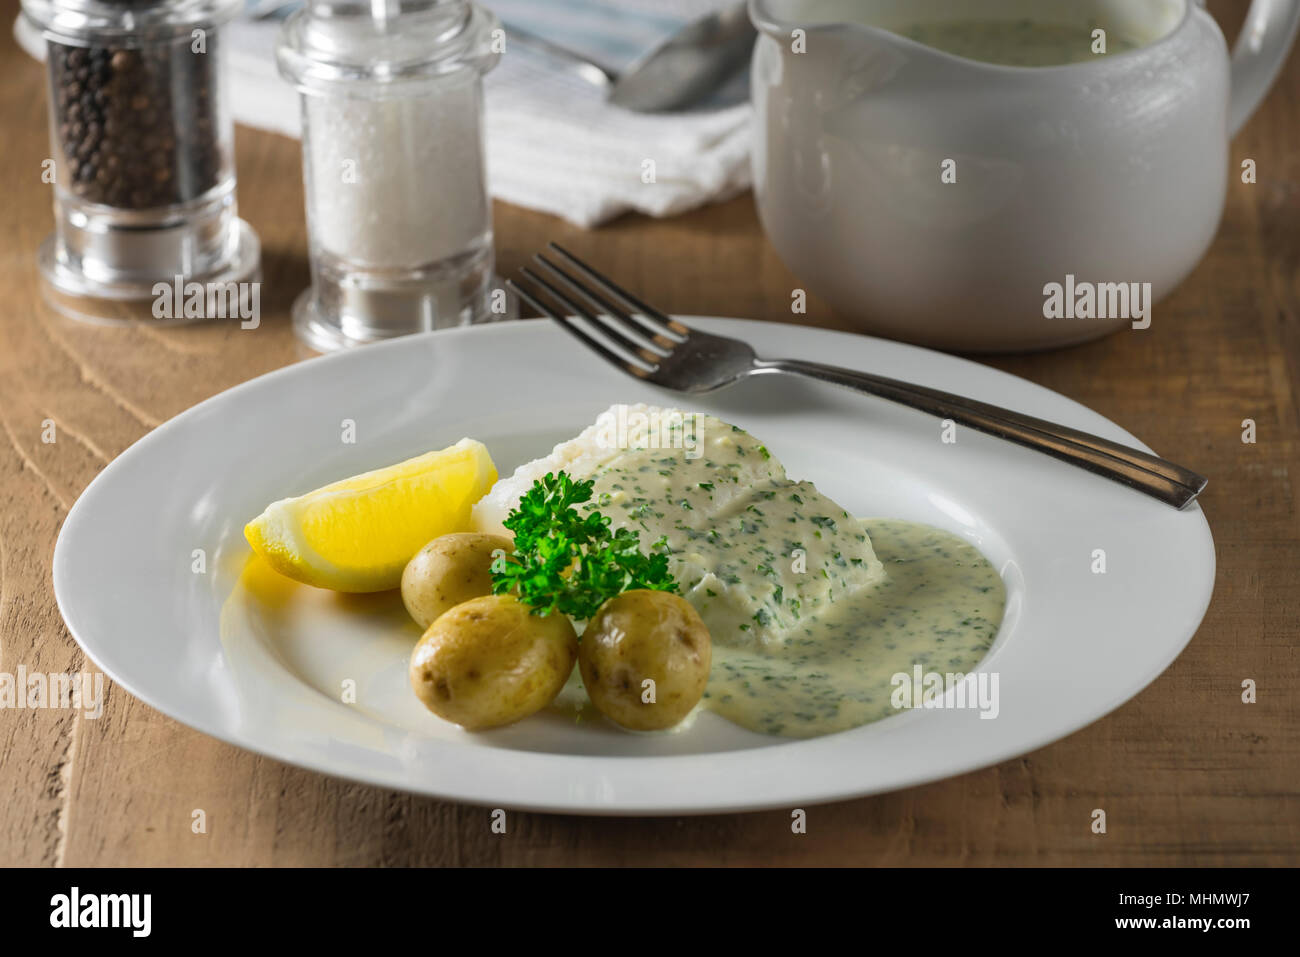 Cod in parsley sauce. Stock Photo